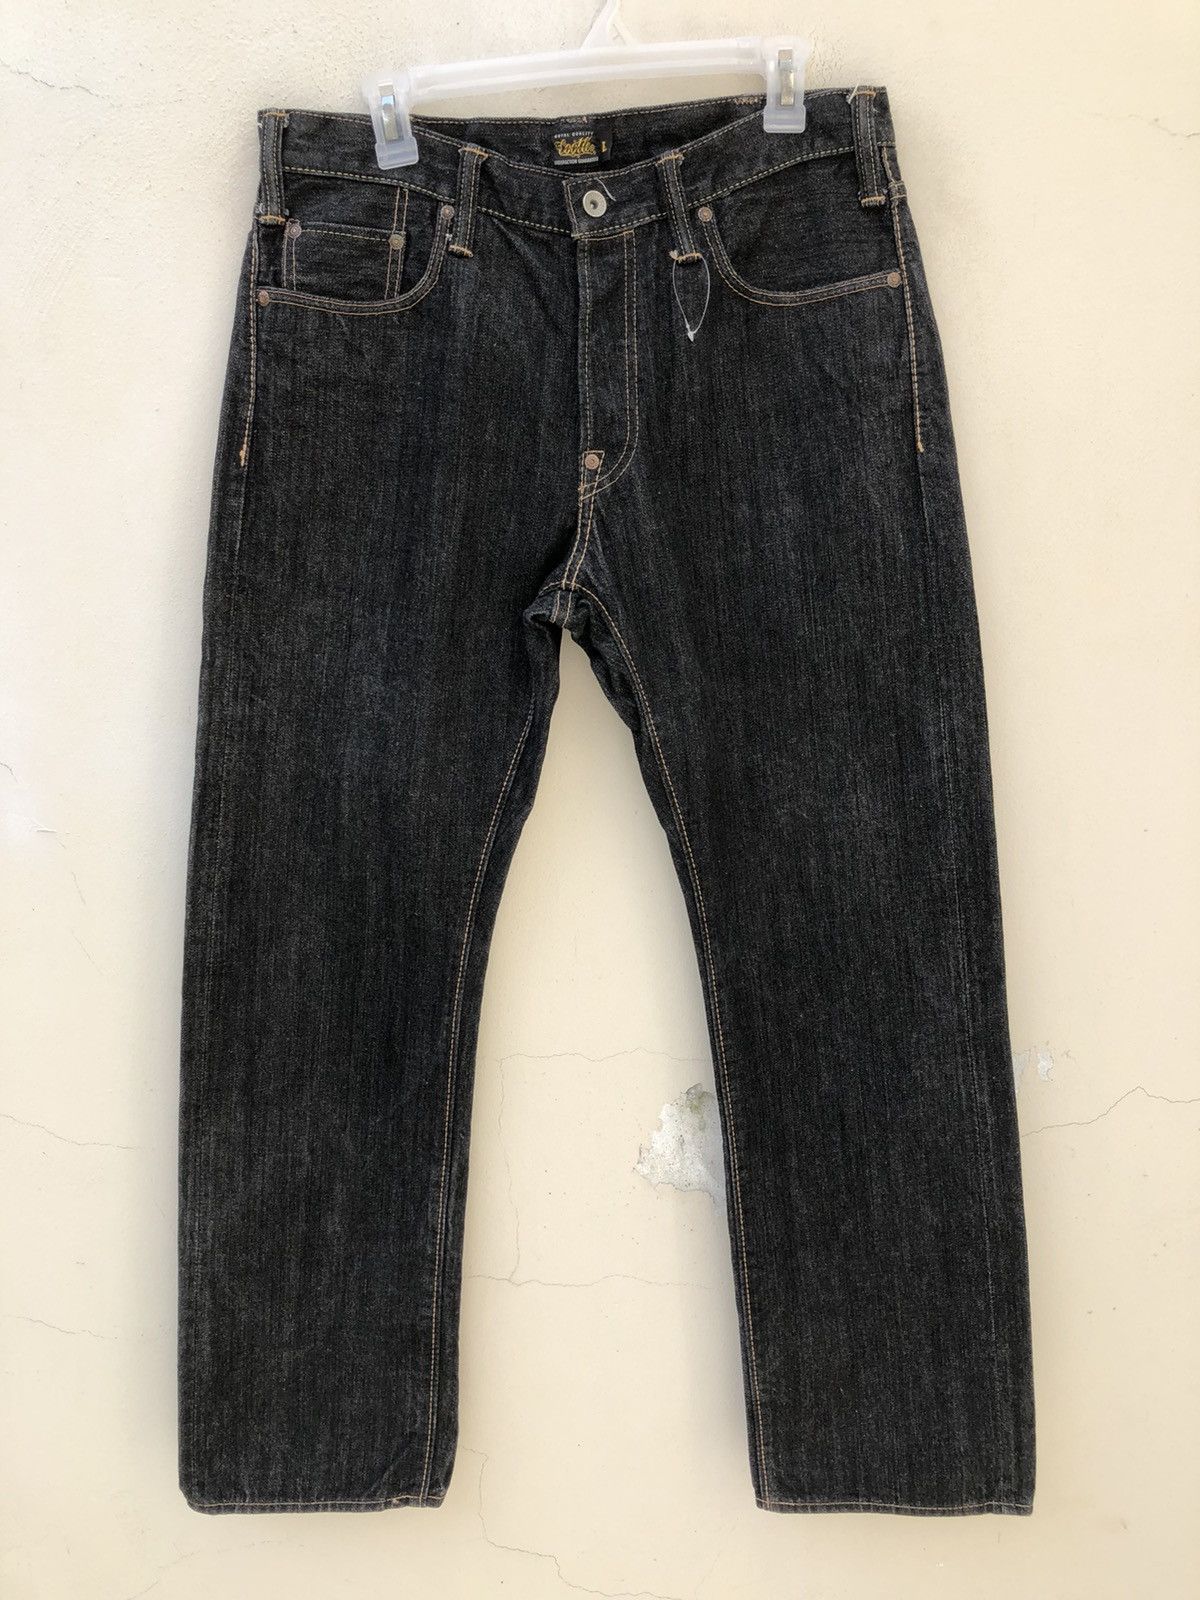 Engineered Garments Cootie Japan Thick Denim Selvedge Jeans Leather ...